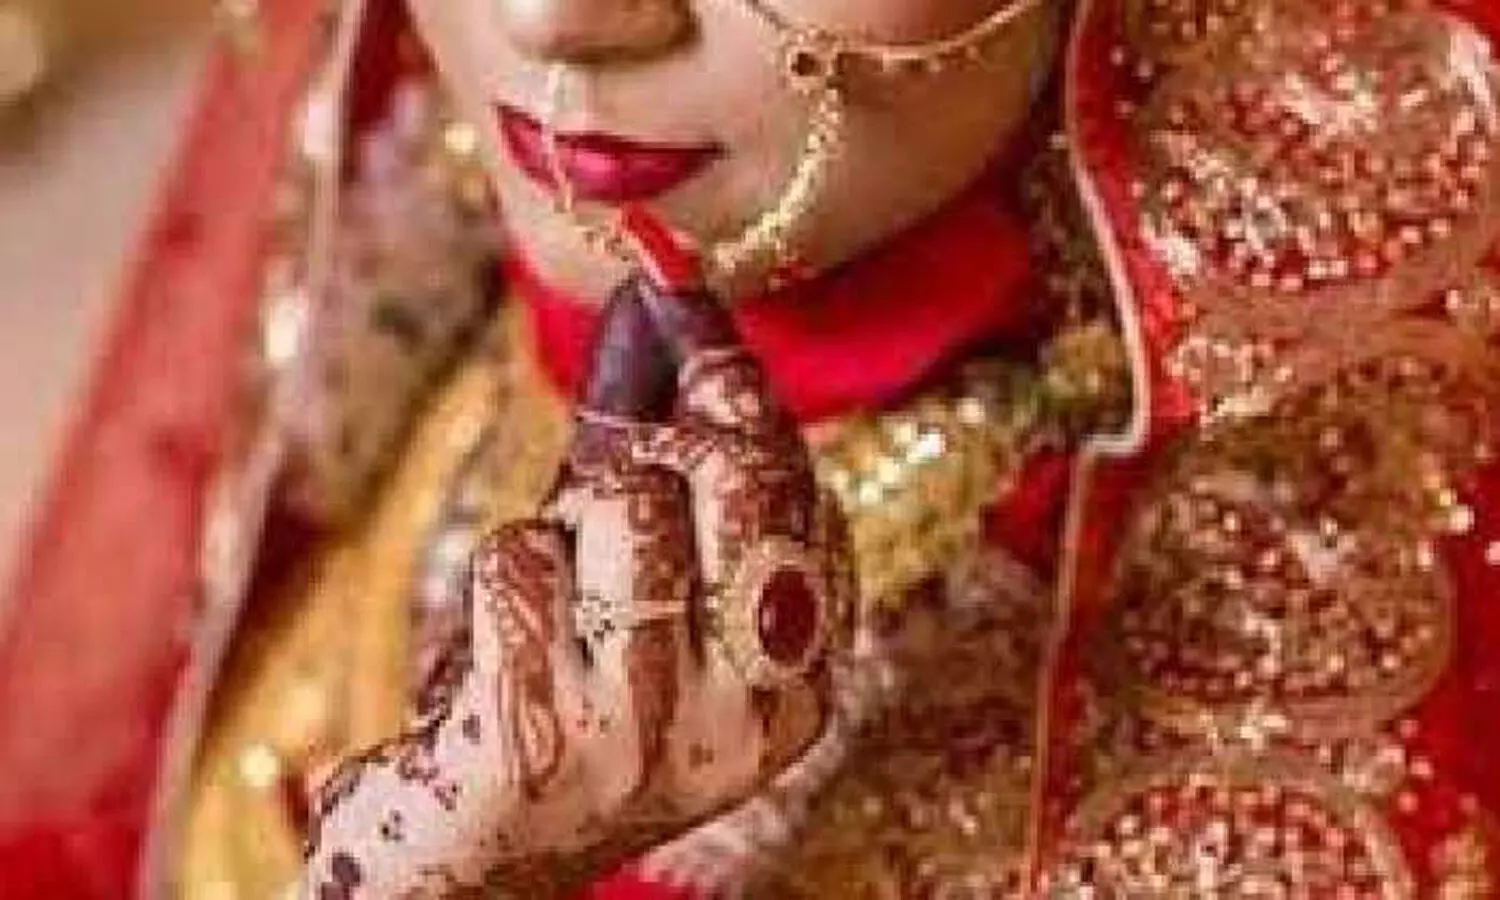 Dulhan ka Thappad: Bride slaps groom just after marriage, returns to her home